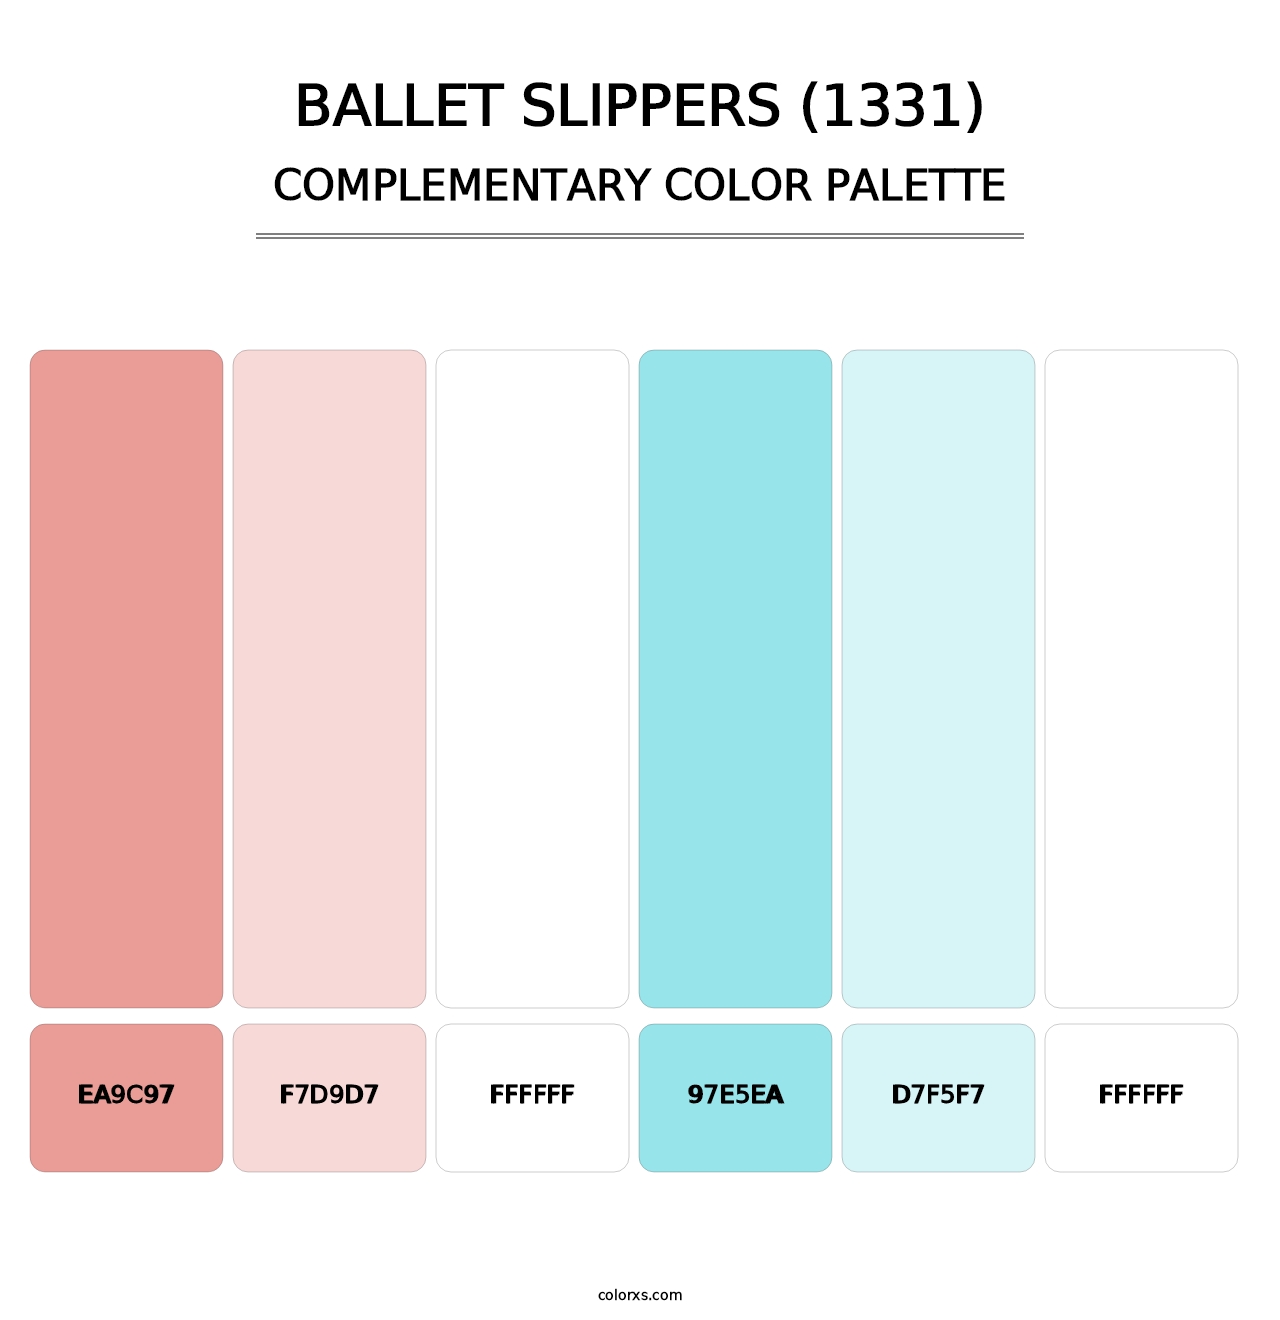 Ballet Slippers (1331) - Complementary Color Palette